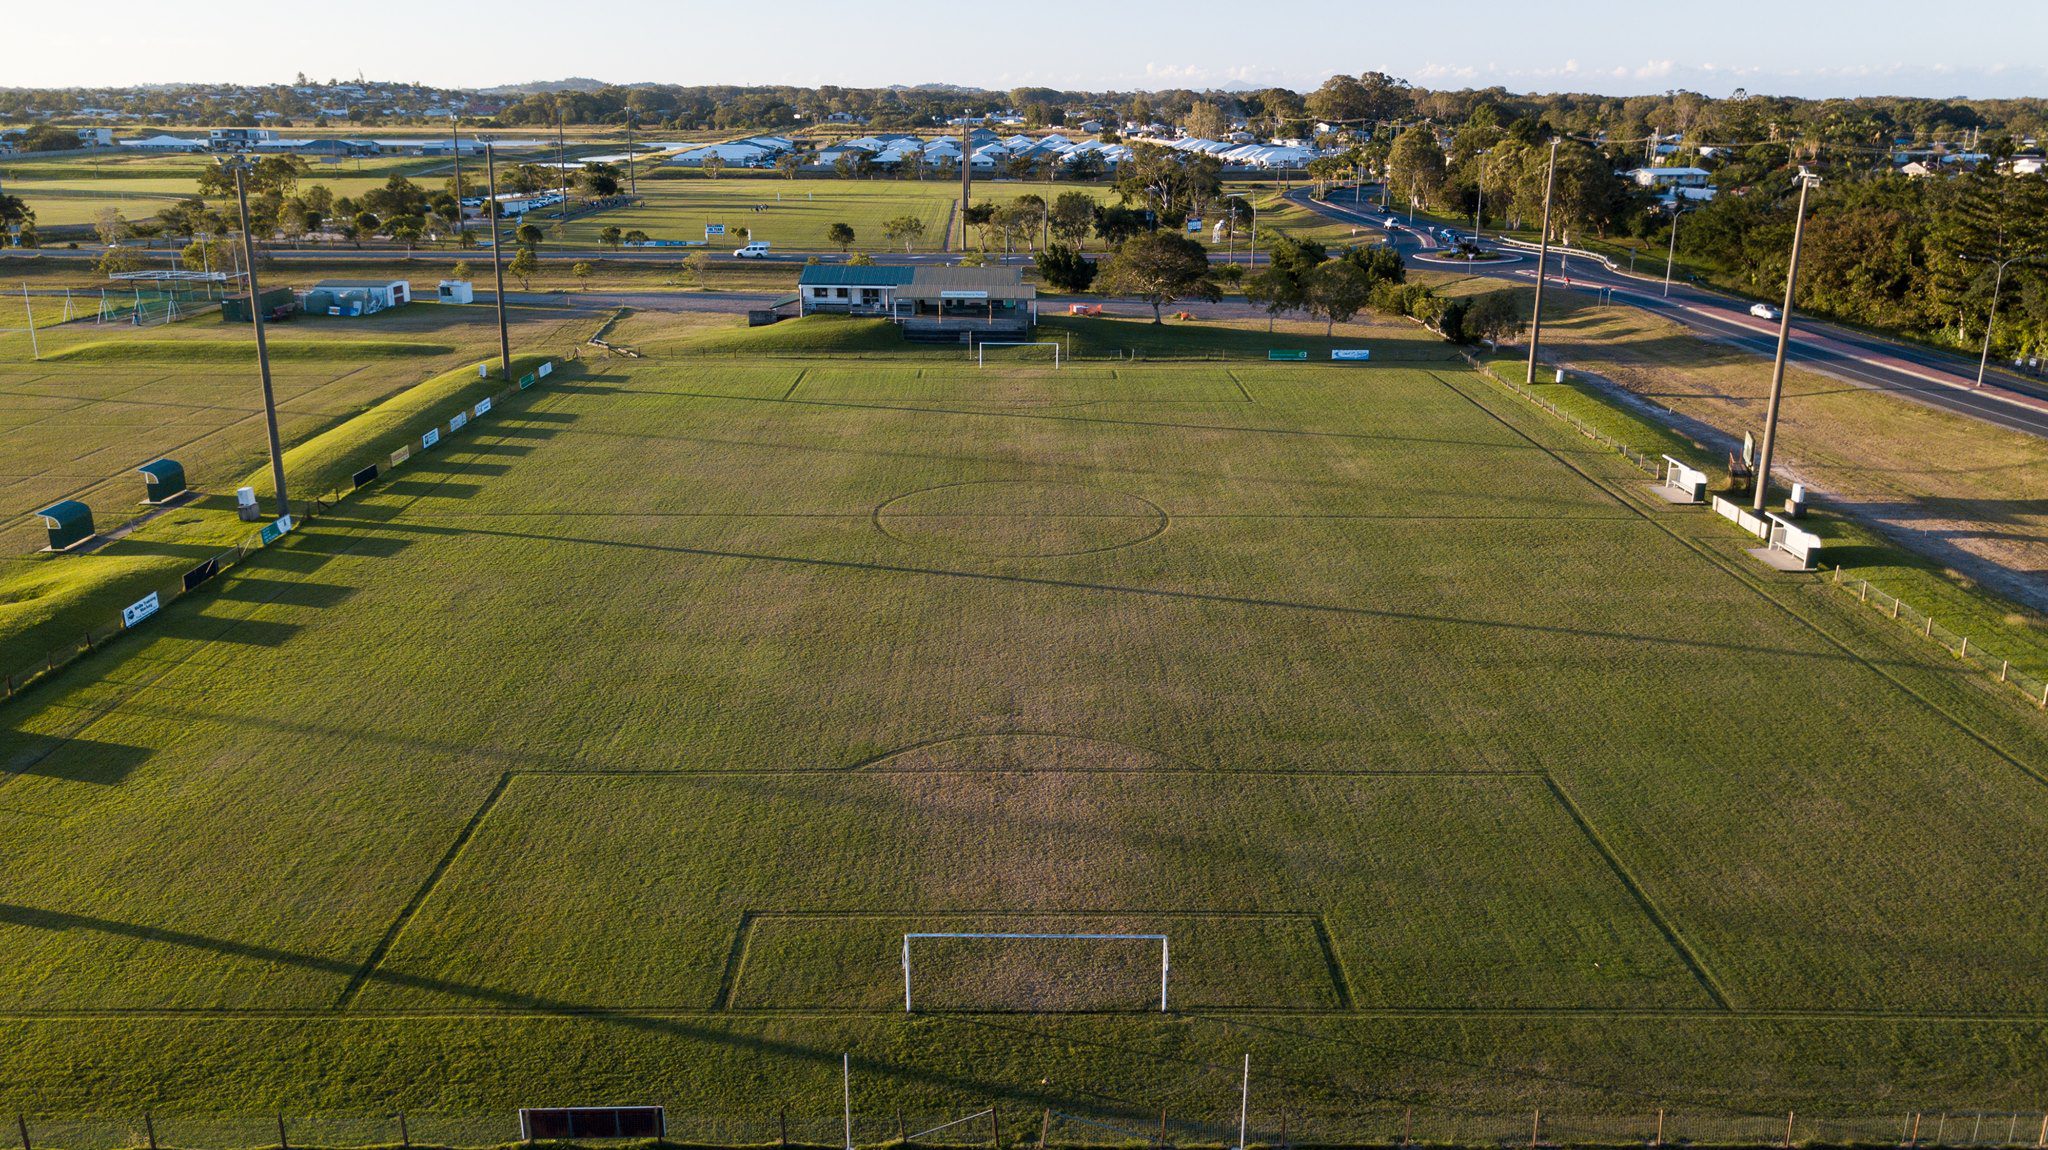 Mackay Lions Soccer Club Grounds.